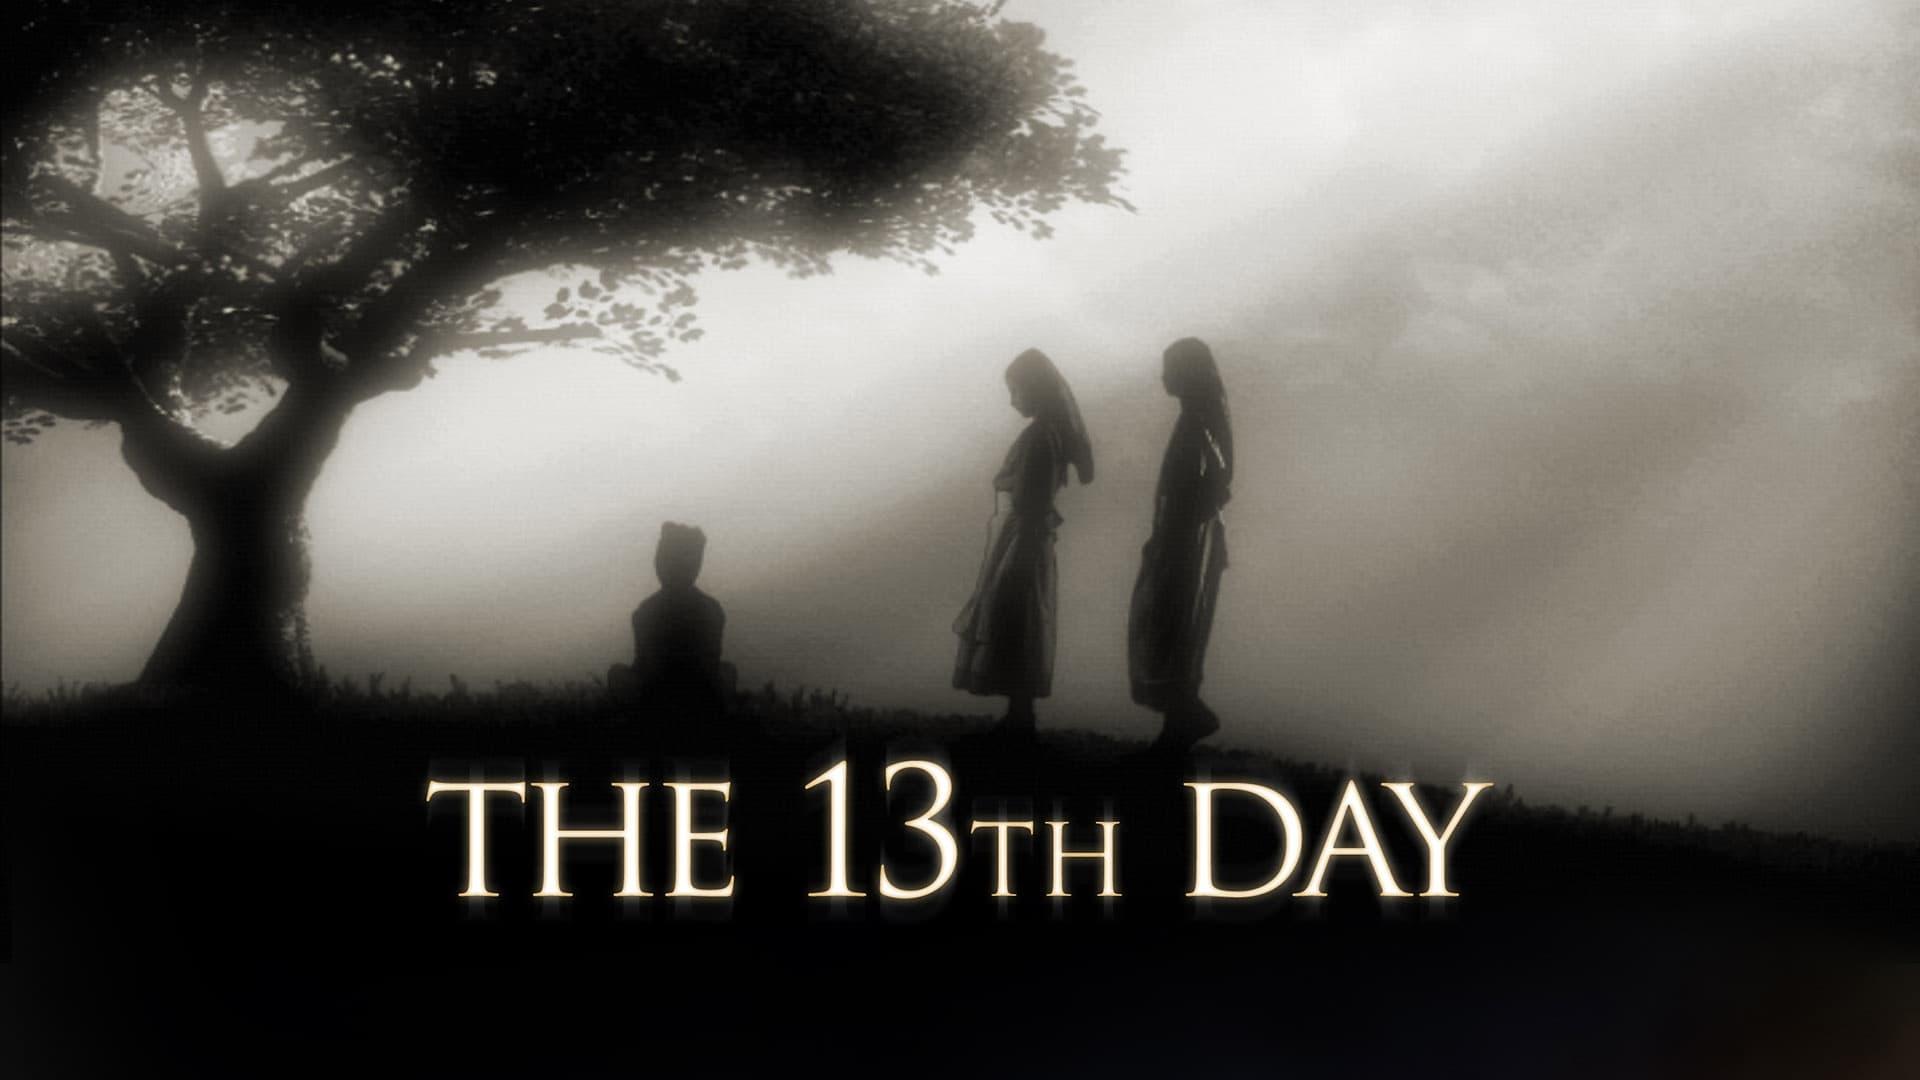 The 13th Day backdrop